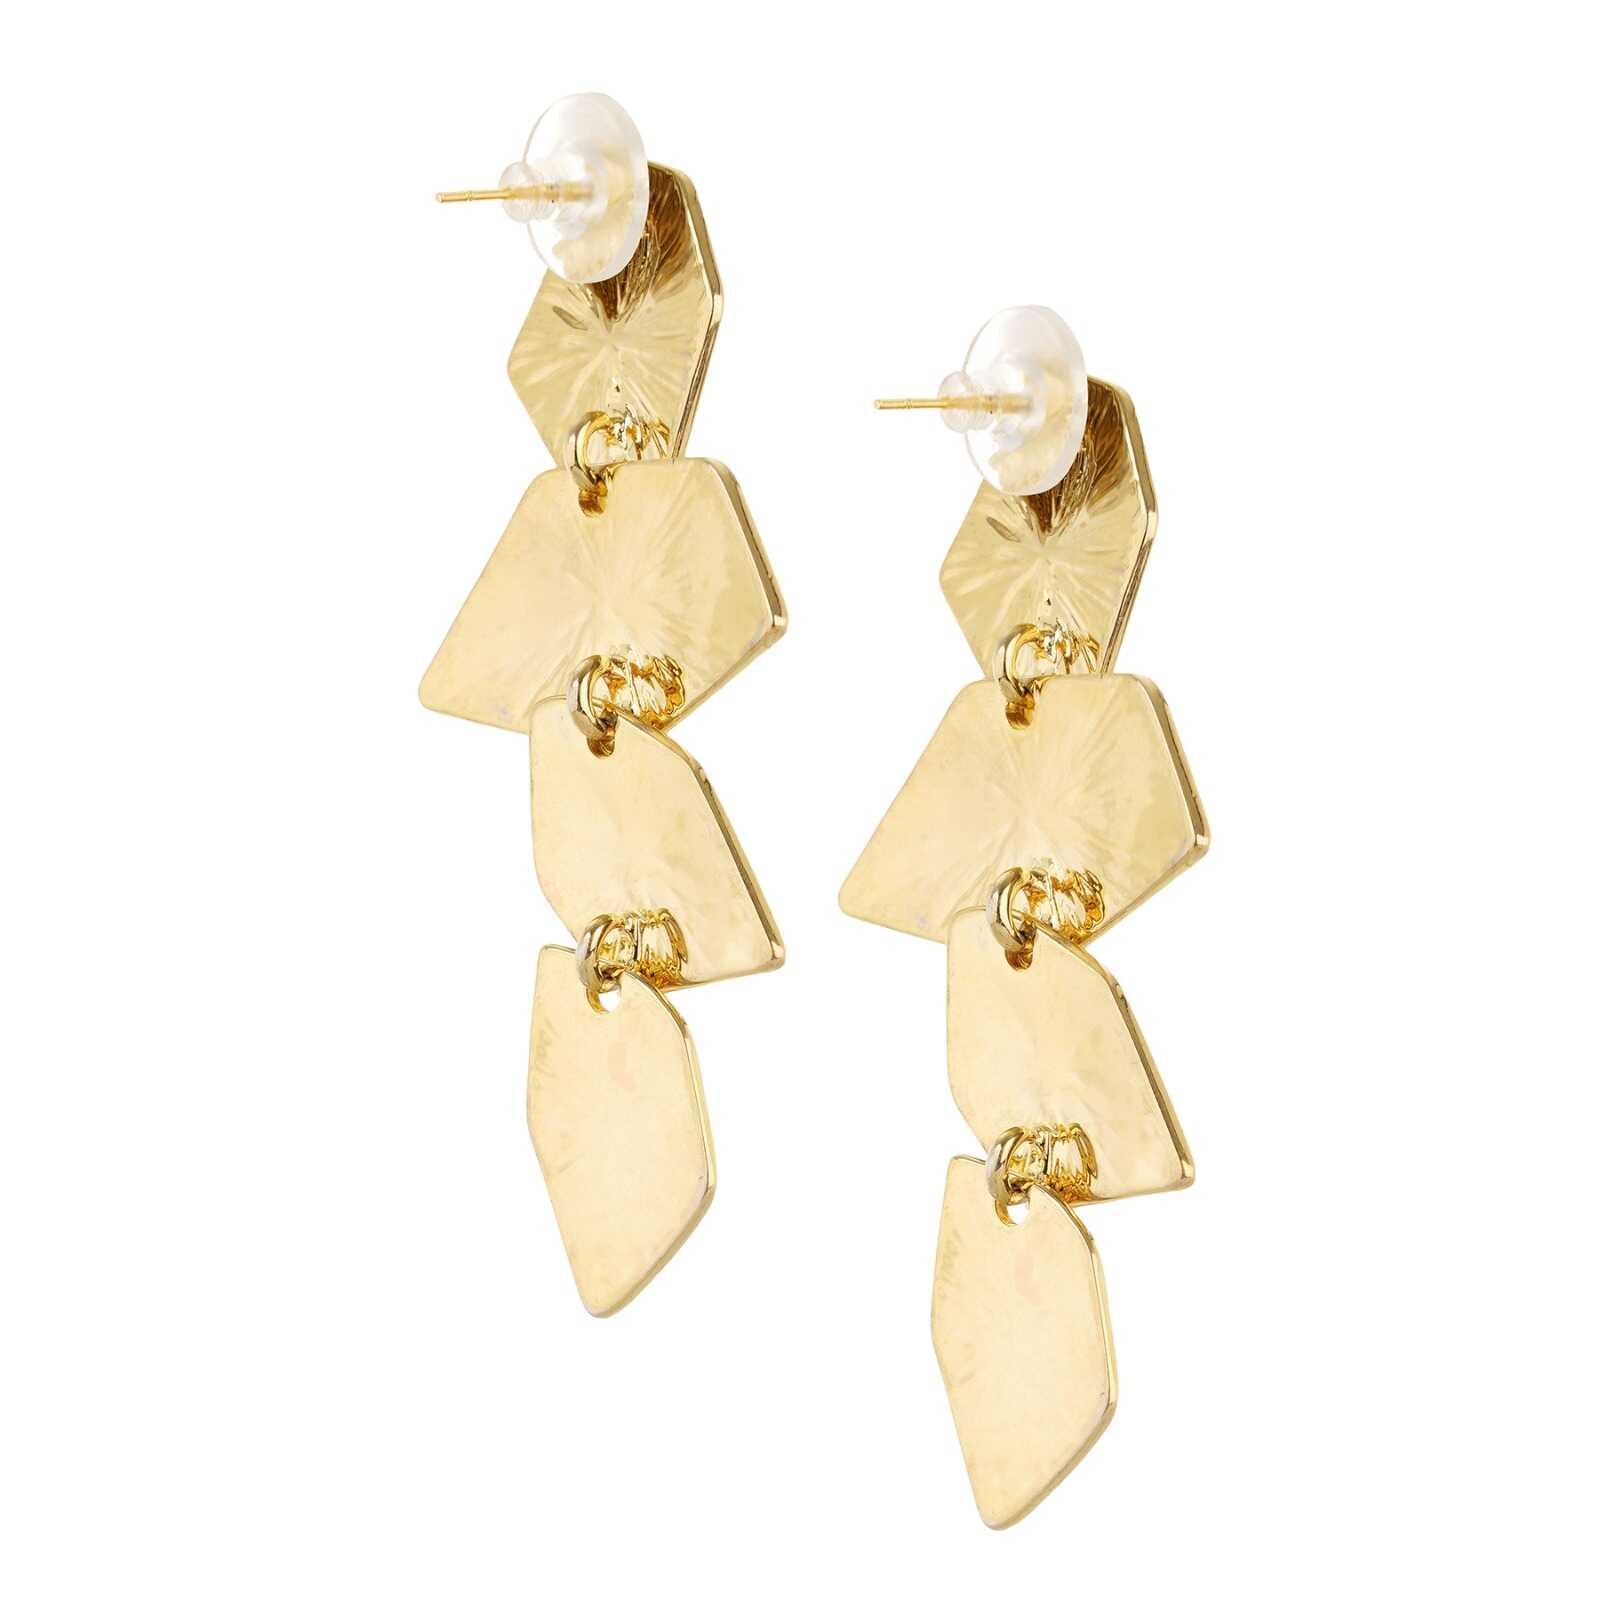 Buy Exotique Stylish Western Claw-Shaped Stud Earrings with Zircon Stones  Online In India At Discounted Prices